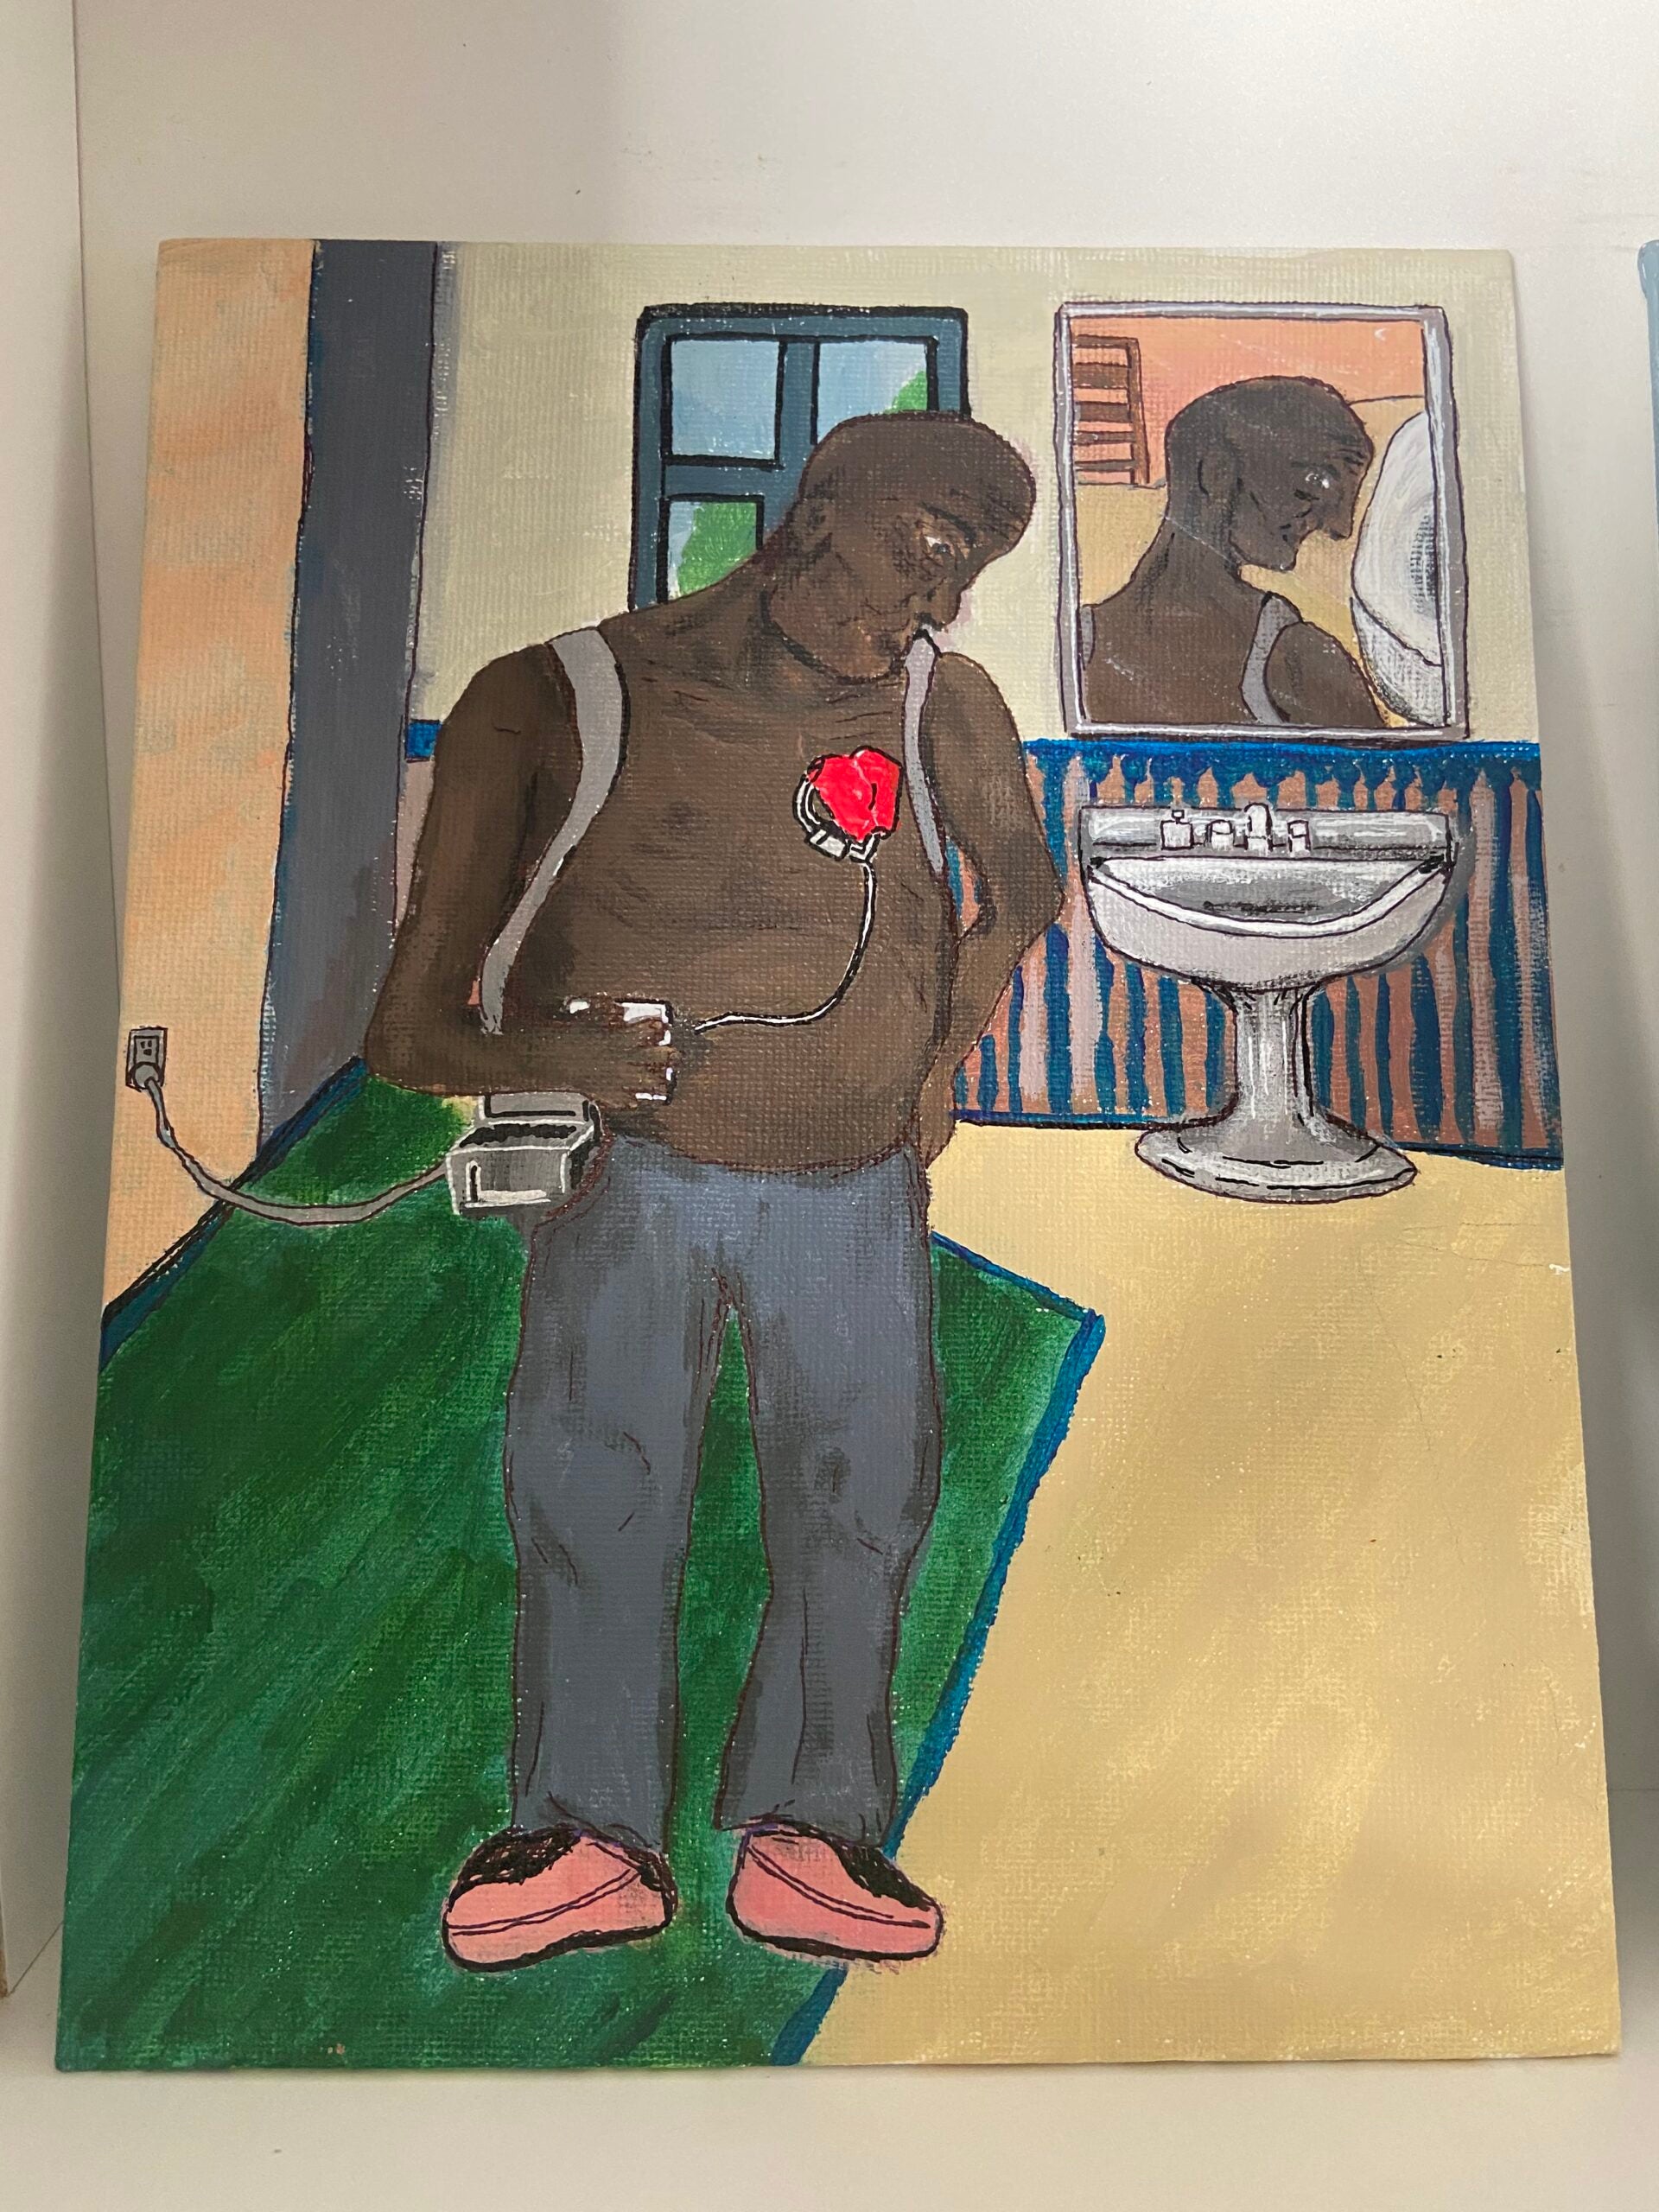 Painting of a man standing in what appears to be a bathroom. Behind him, there is a mirror, showing half his face, and a sink. The man is shirtless, and his heart is visible on top of his skin, as it is connected to a life saving device, connected, likewise, to the wall.